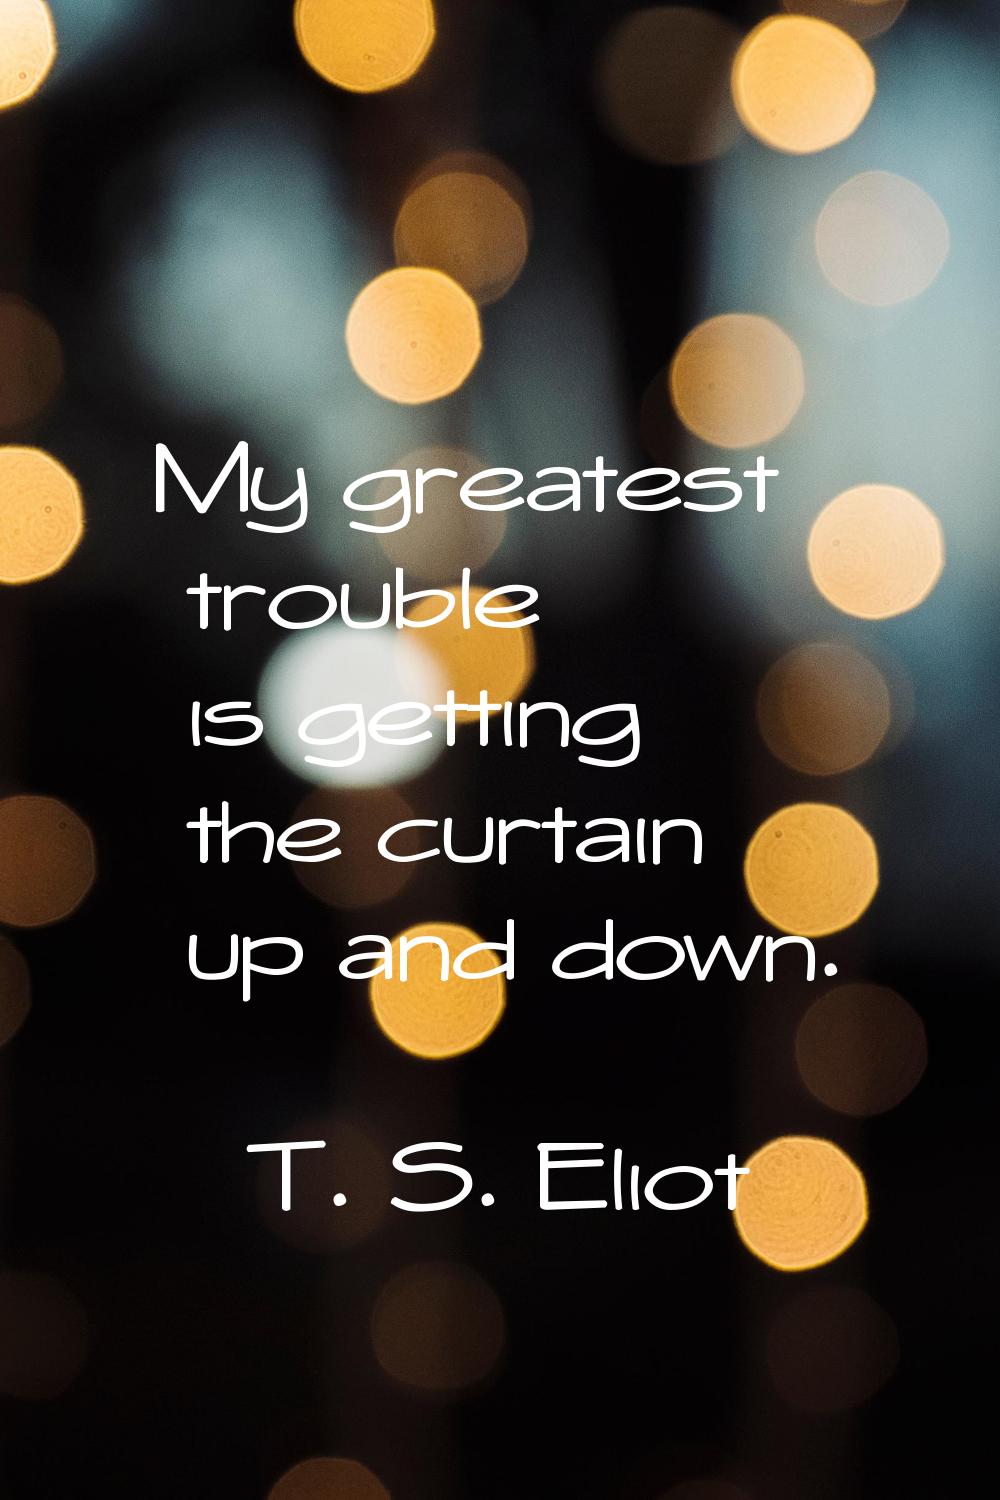 My greatest trouble is getting the curtain up and down.